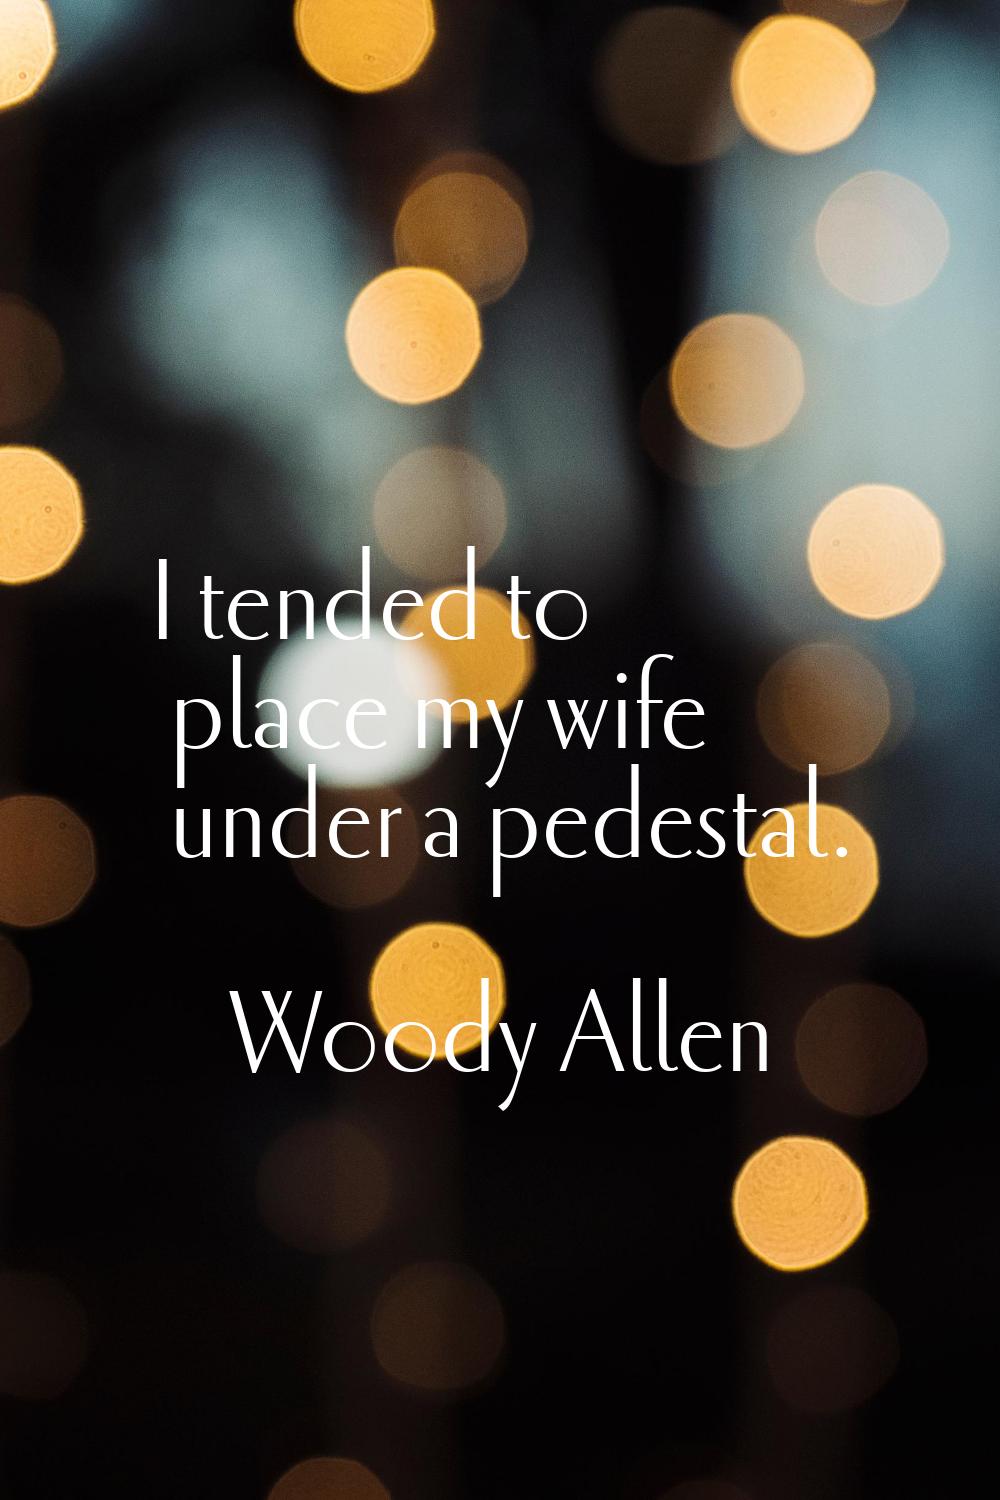 I tended to place my wife under a pedestal.